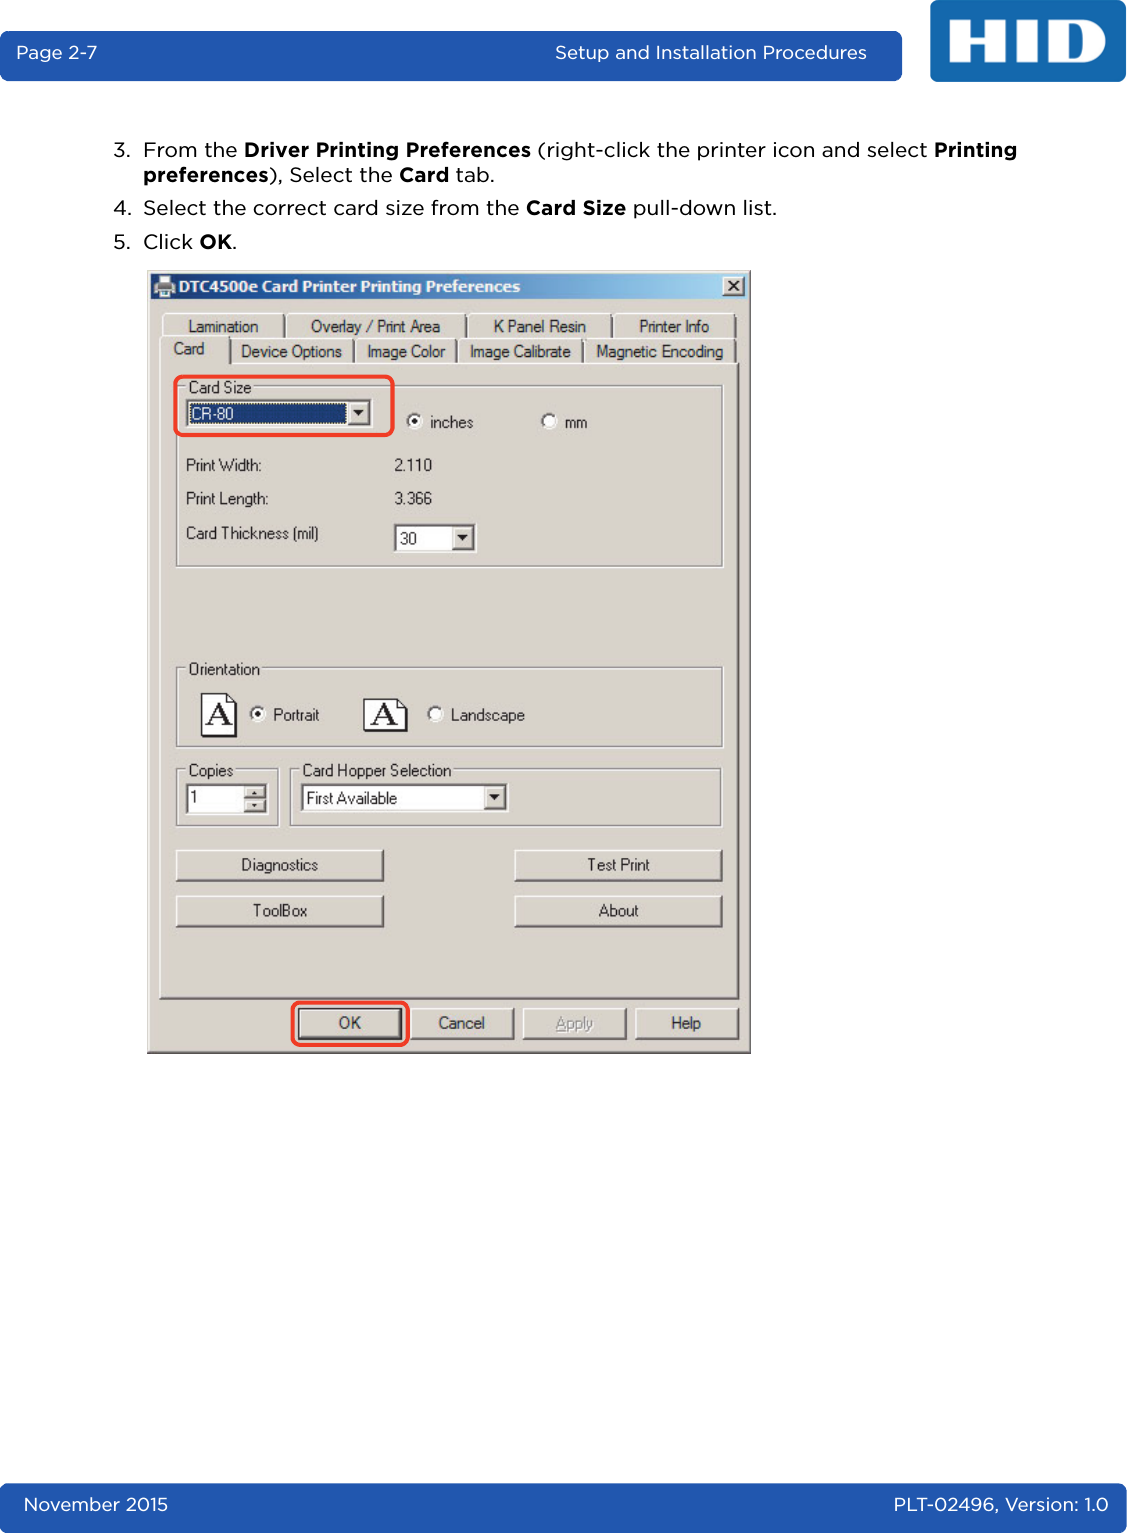 November 2015 PLT-02496, Version: 1.0Page 2-7 Setup and Installation Procedures3. From the Driver Printing Preferences (right-click the printer icon and select Printing preferences), Select the Card tab.4. Select the correct card size from the Card Size pull-down list.5. Click OK.